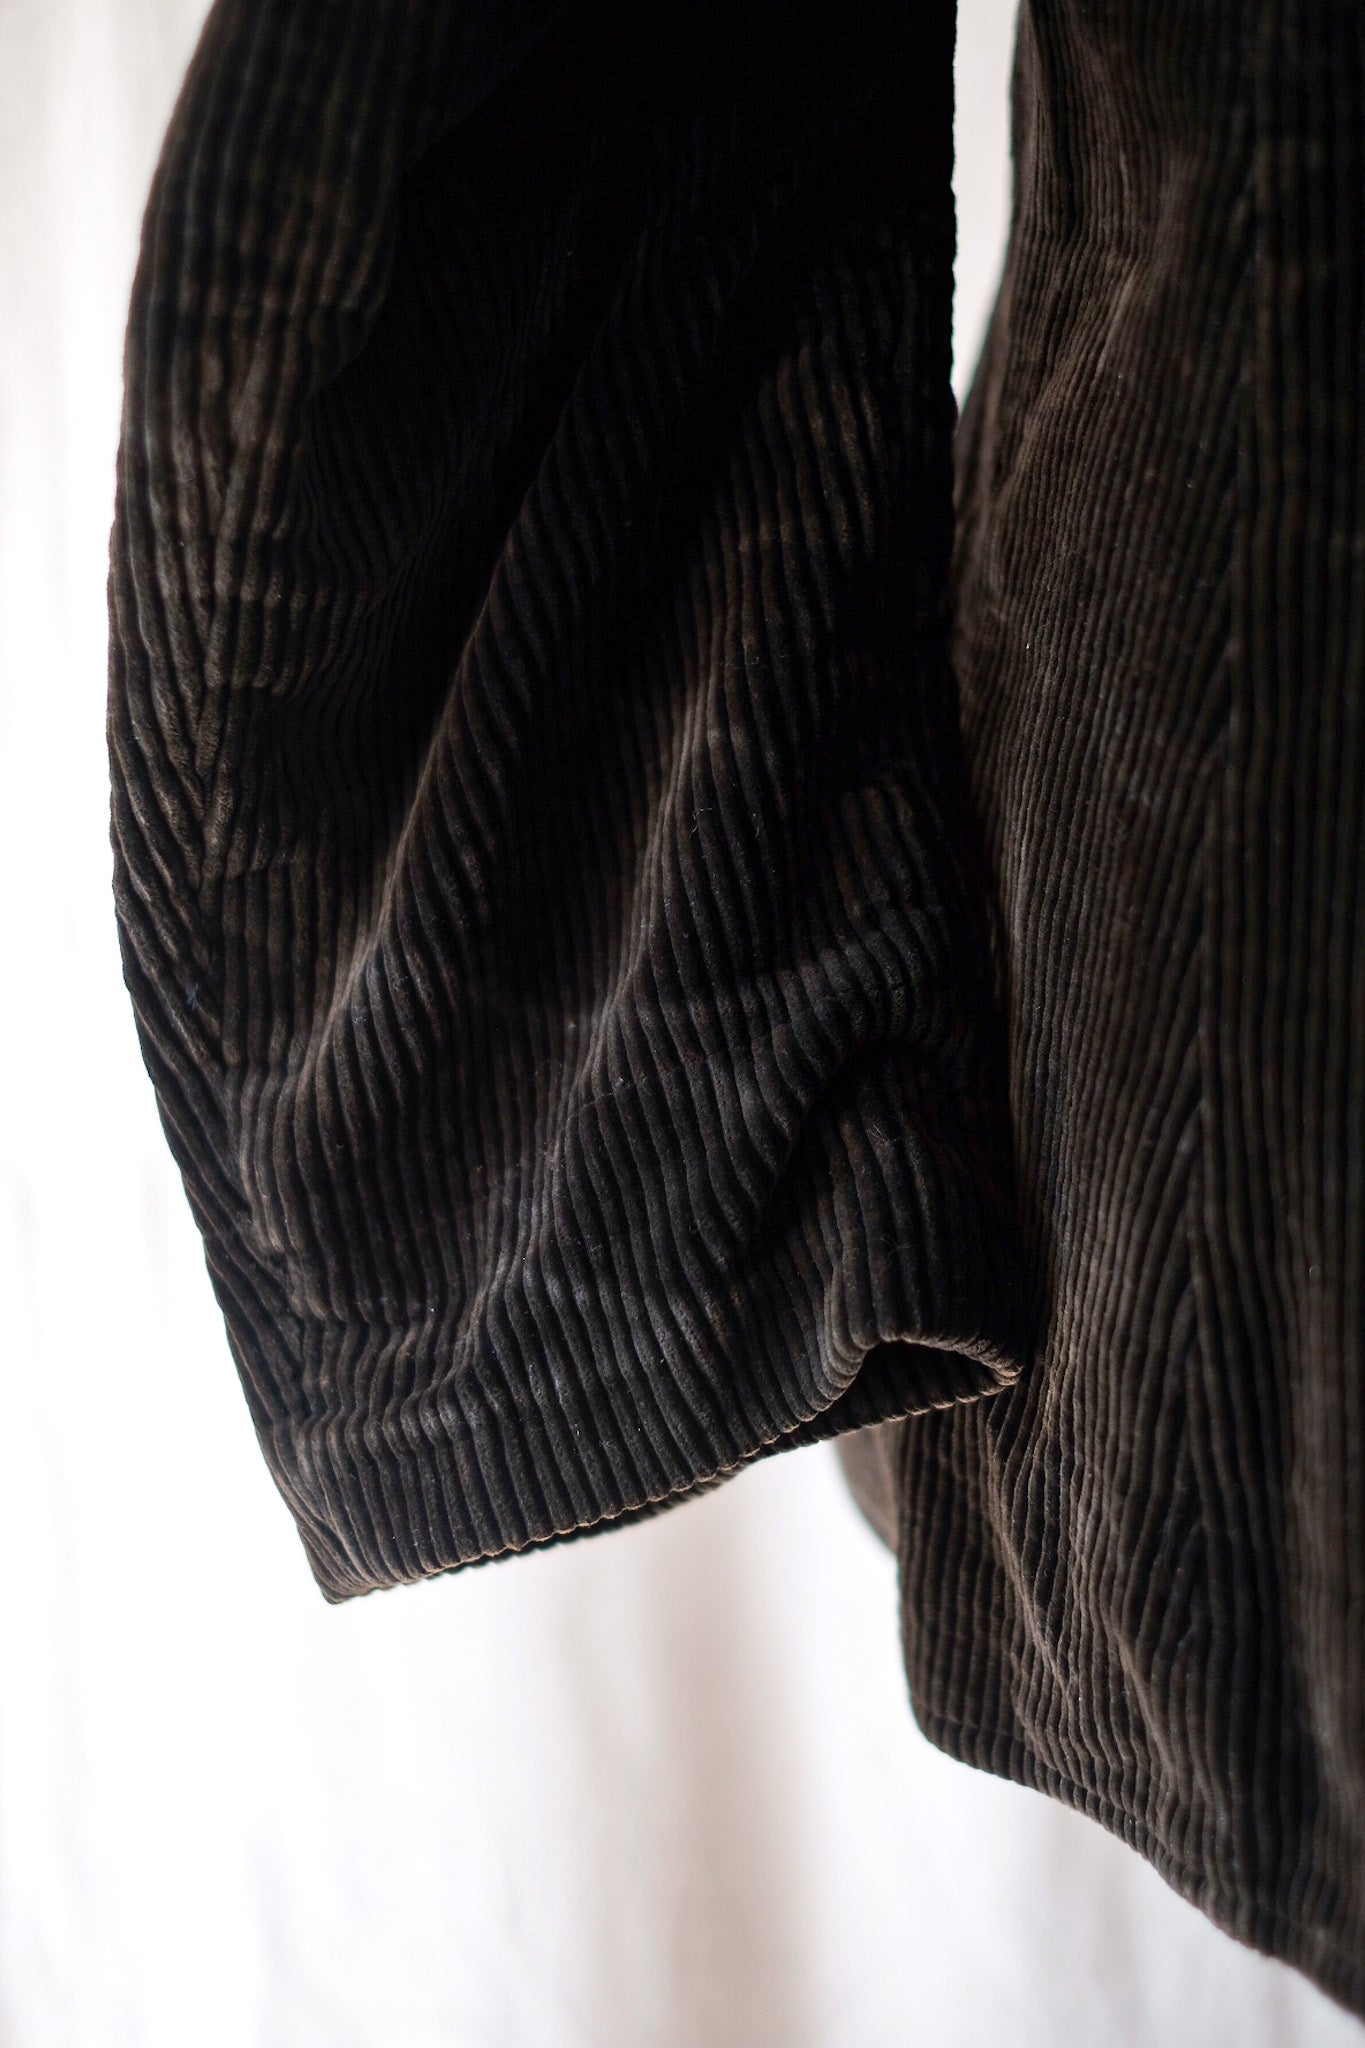 【~30's】French Vintage Dark Brown Corduroy Work Jacket "Adolphe Lafont" "Dead Stock"